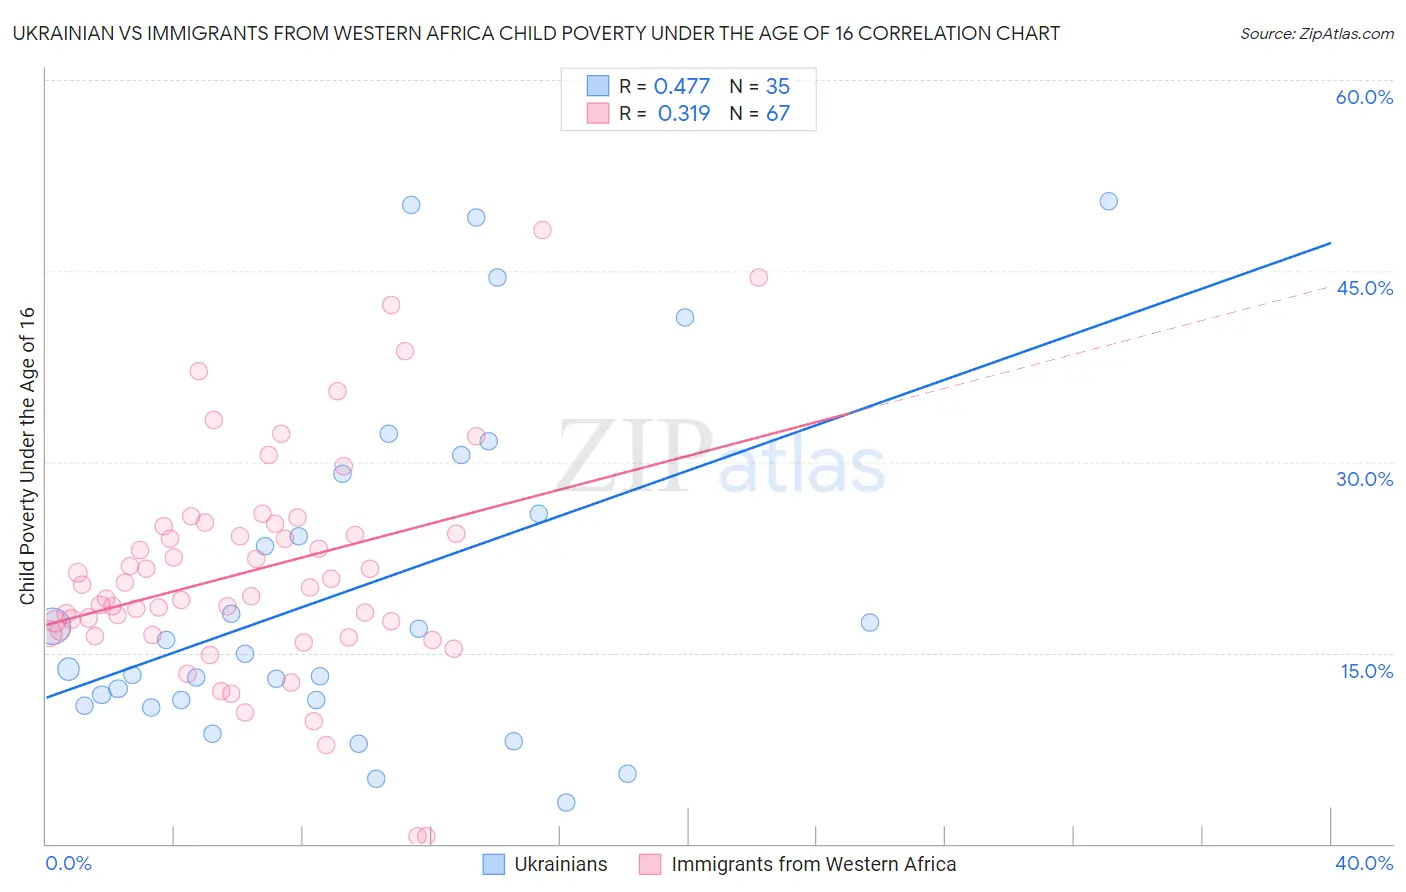 Ukrainian vs Immigrants from Western Africa Child Poverty Under the Age of 16